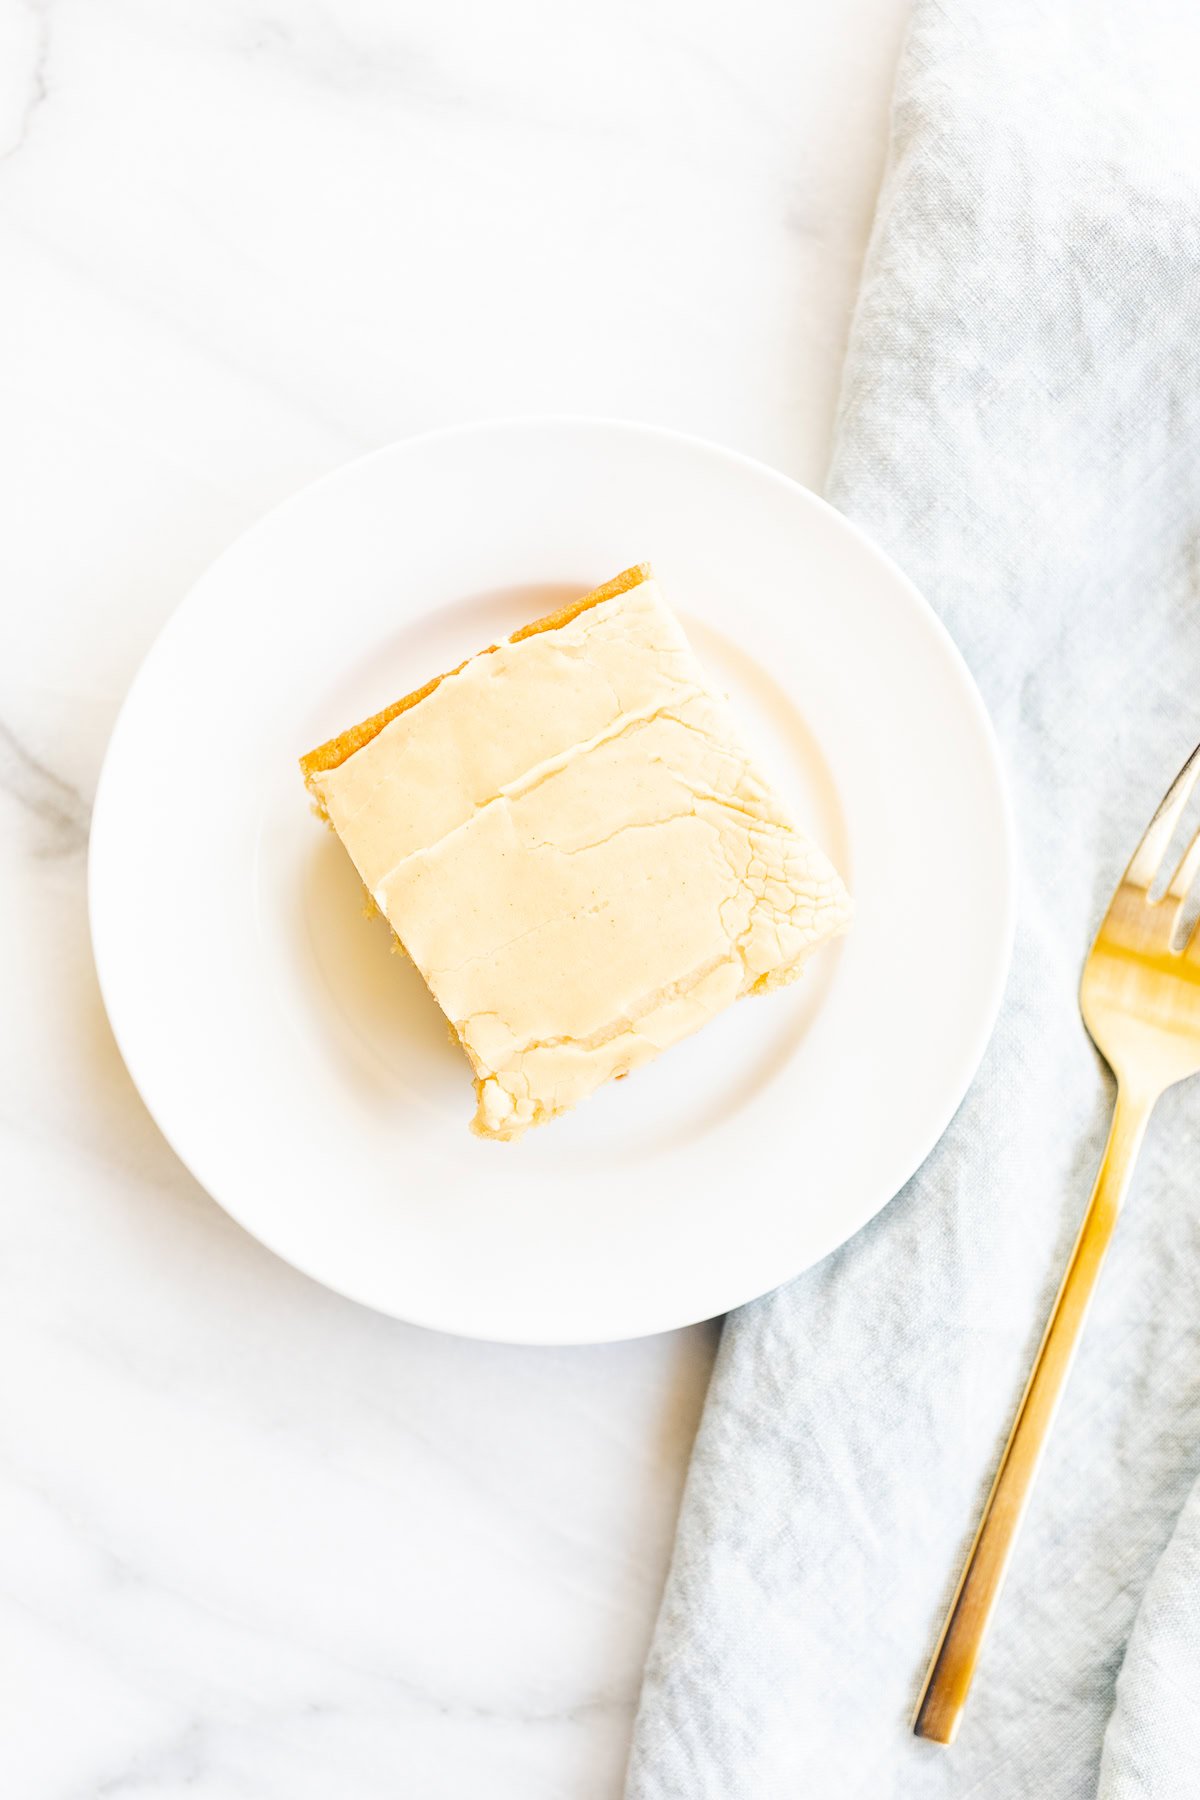 A slice of peanut butter cheesecake on a white plate beside a gold fork, set on a marble surface with a light gray cloth.